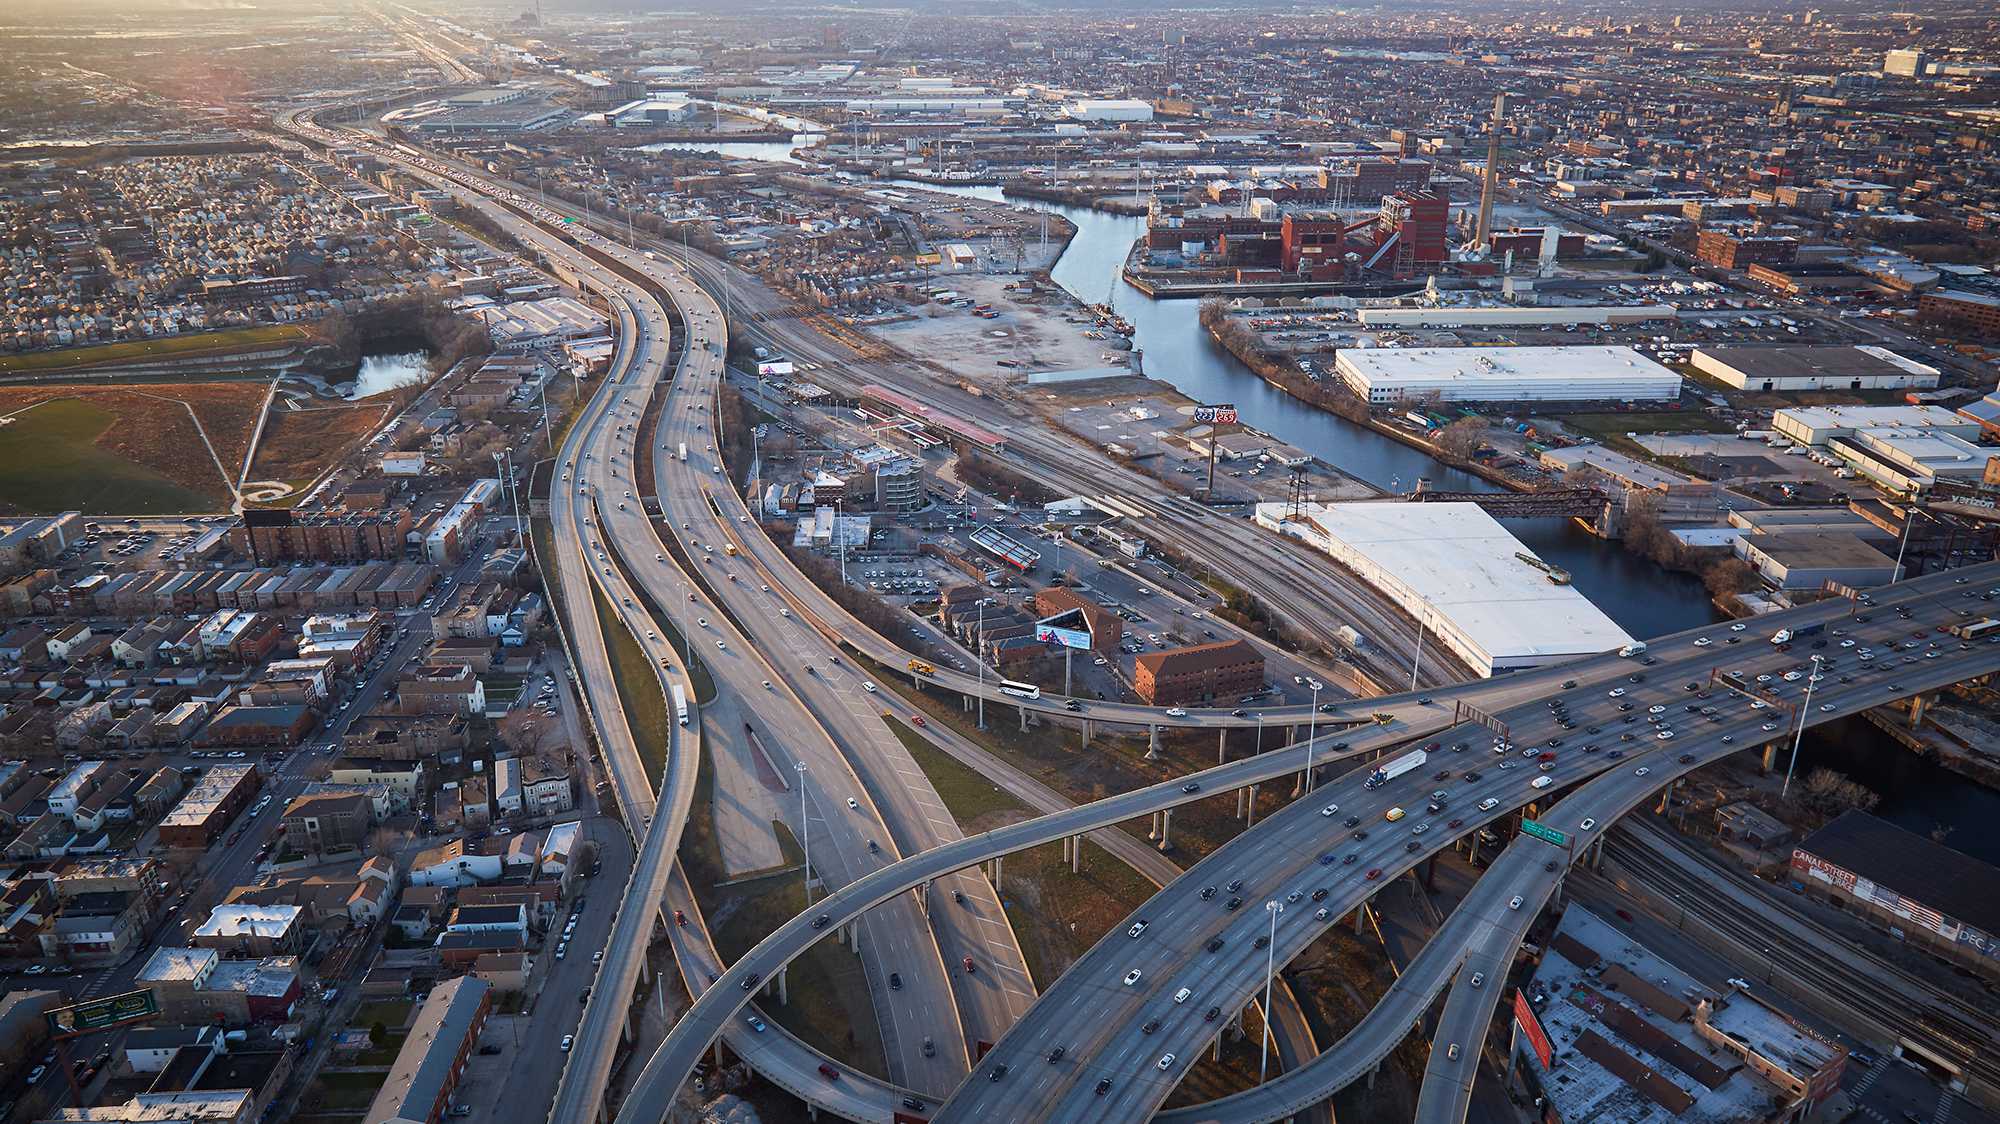 Aerial view of interchanges in Cook County